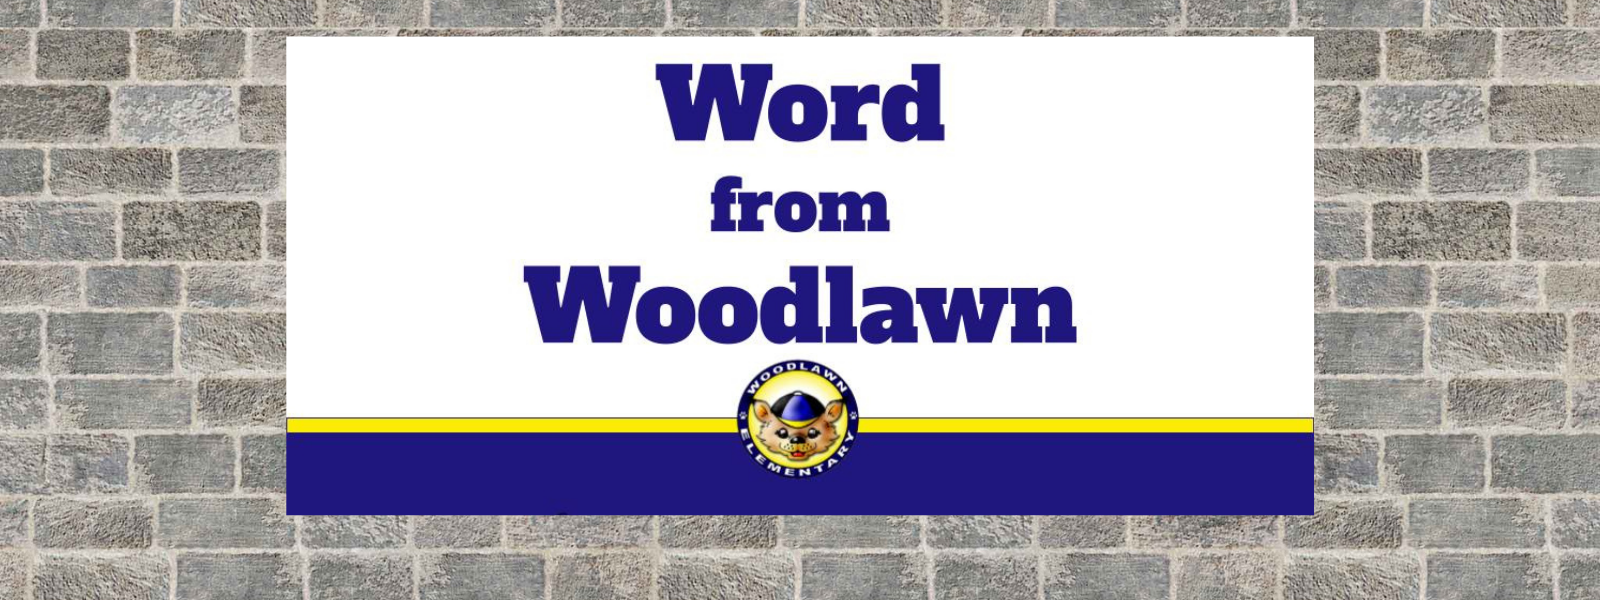 Word from Woodlawn